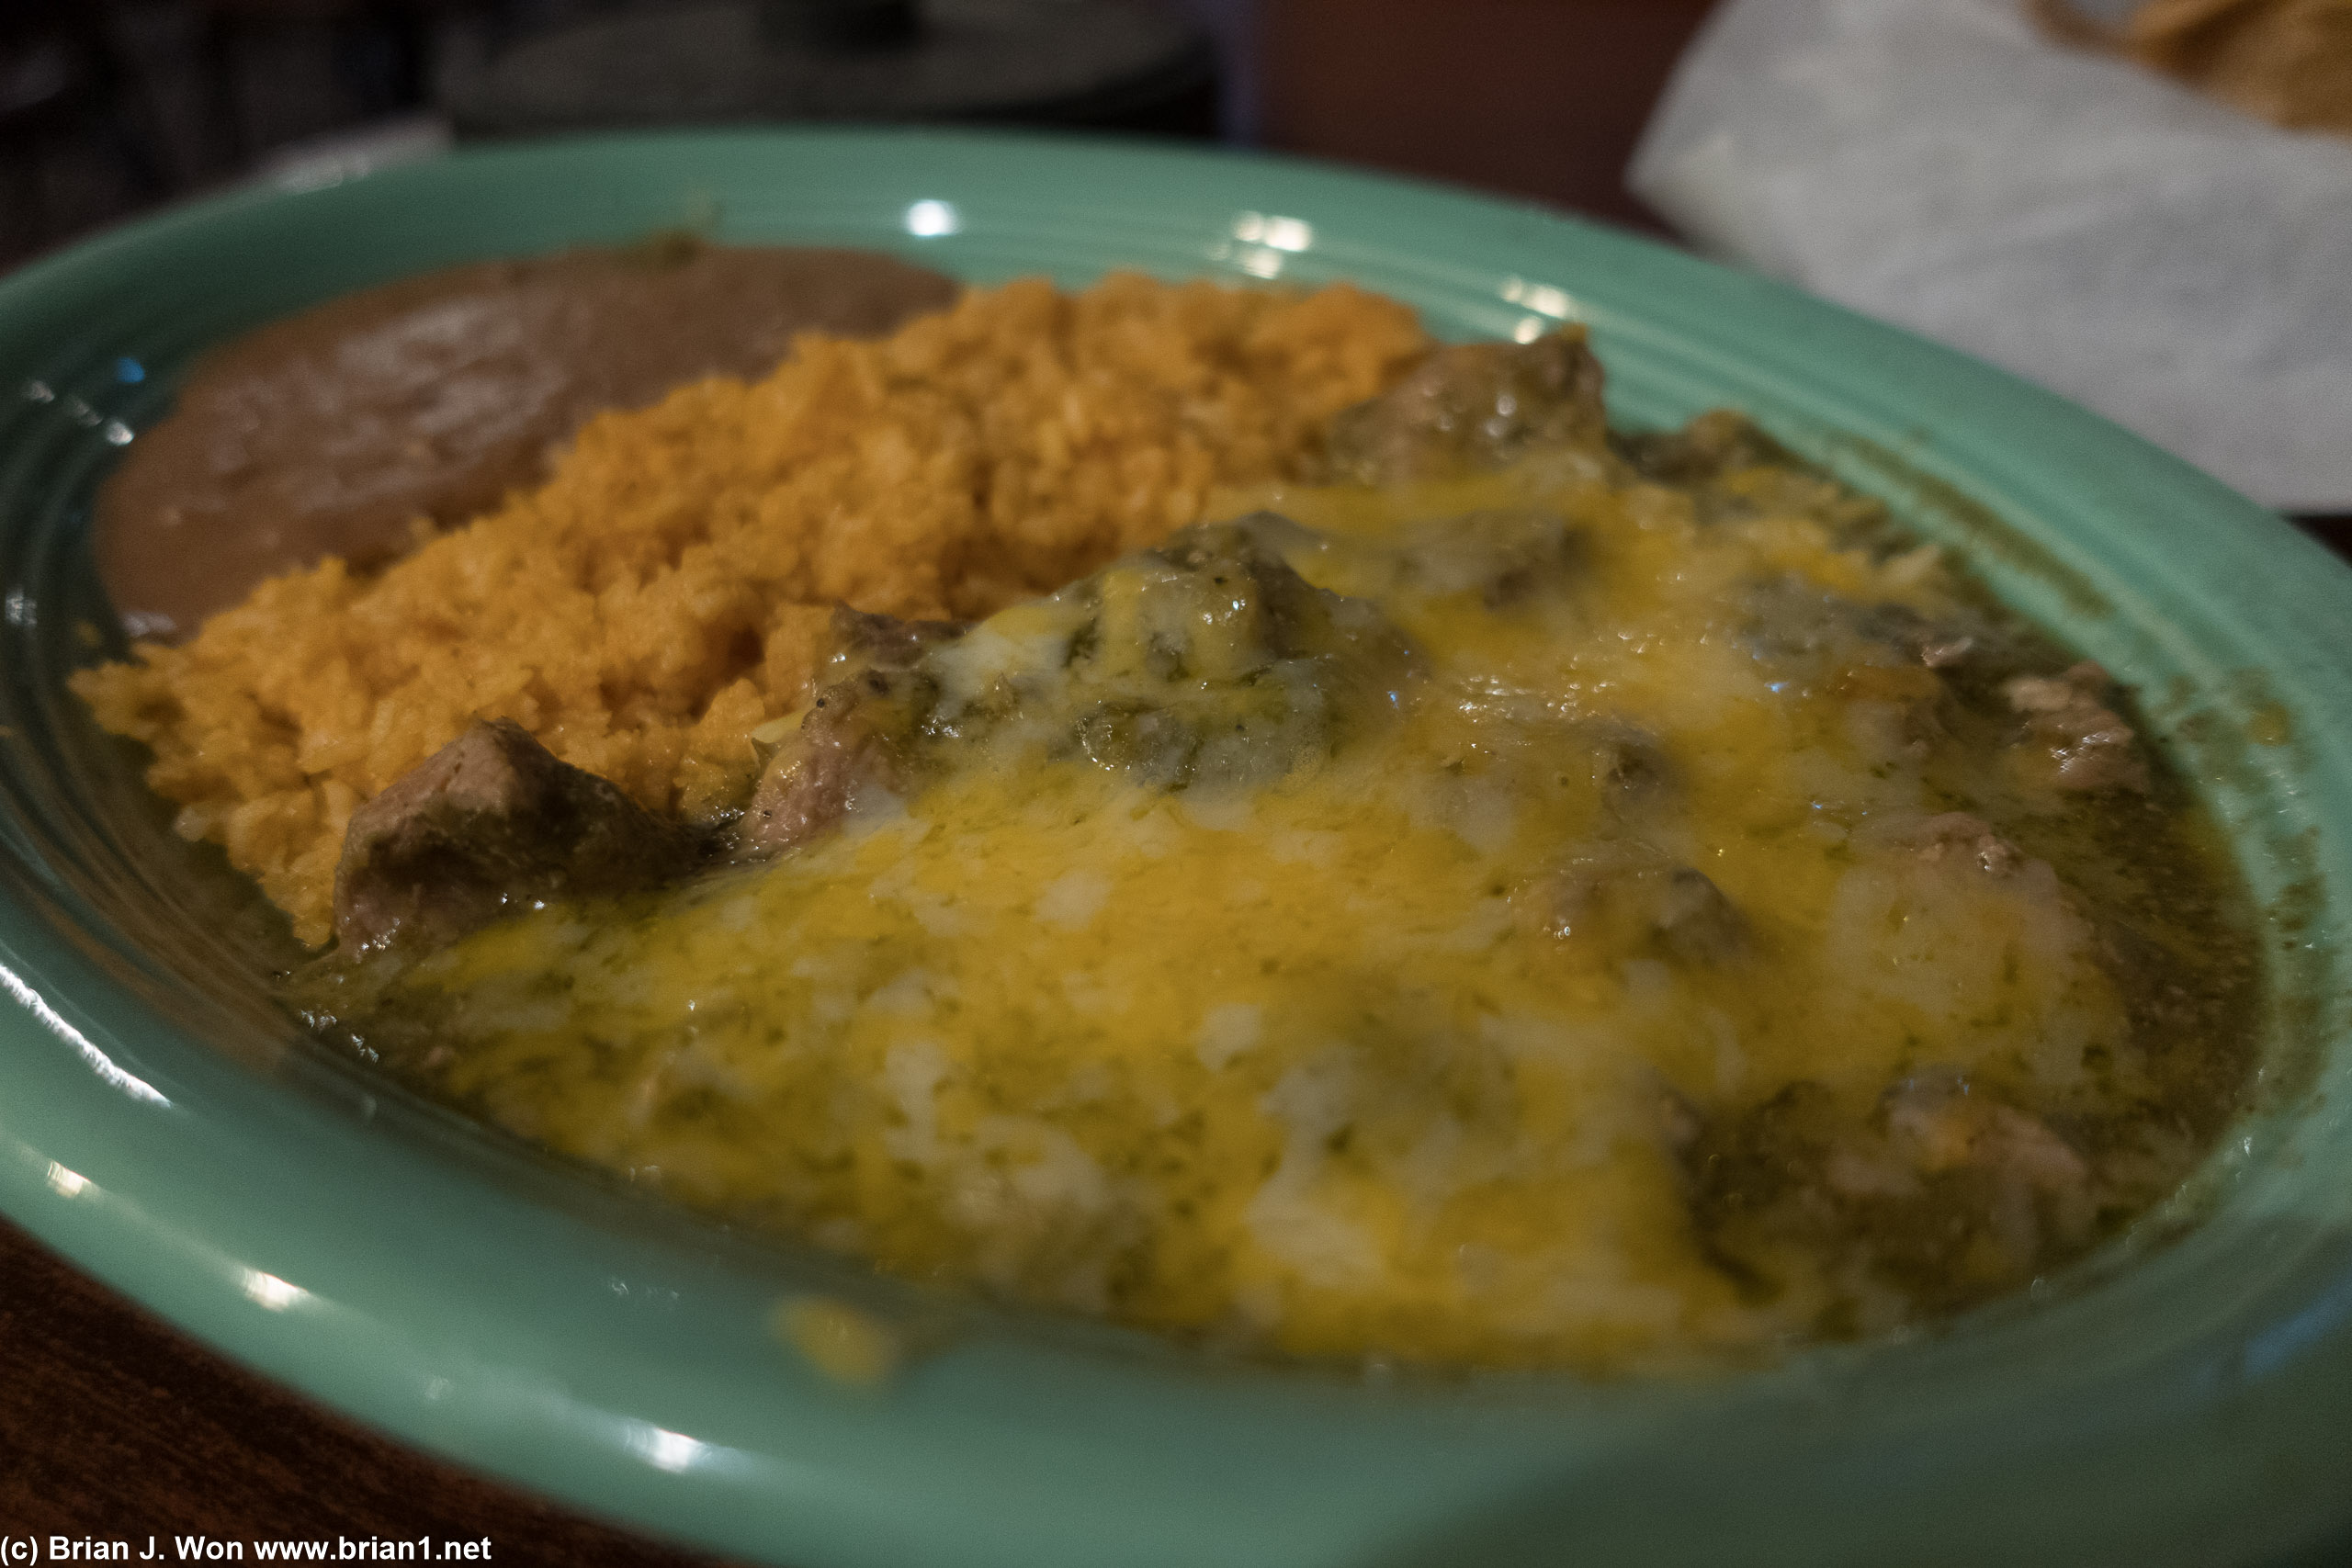 Chile verde was quite forgettable.